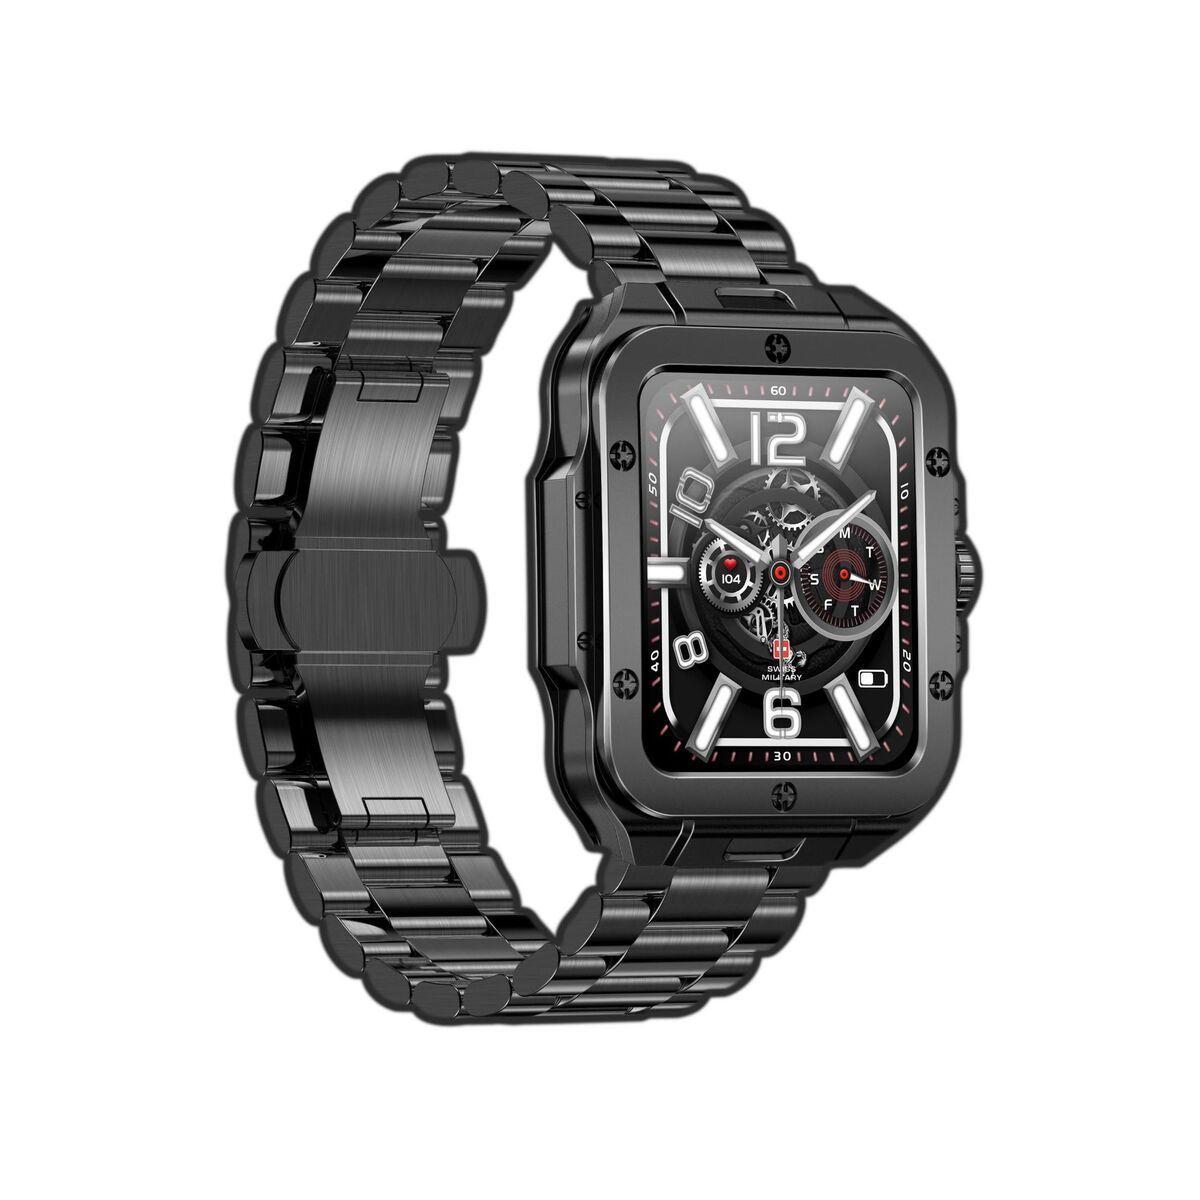 Swiss Military Smart Watch Alps2,Gun Metal frame and Stailless Steel Strap,Square Face